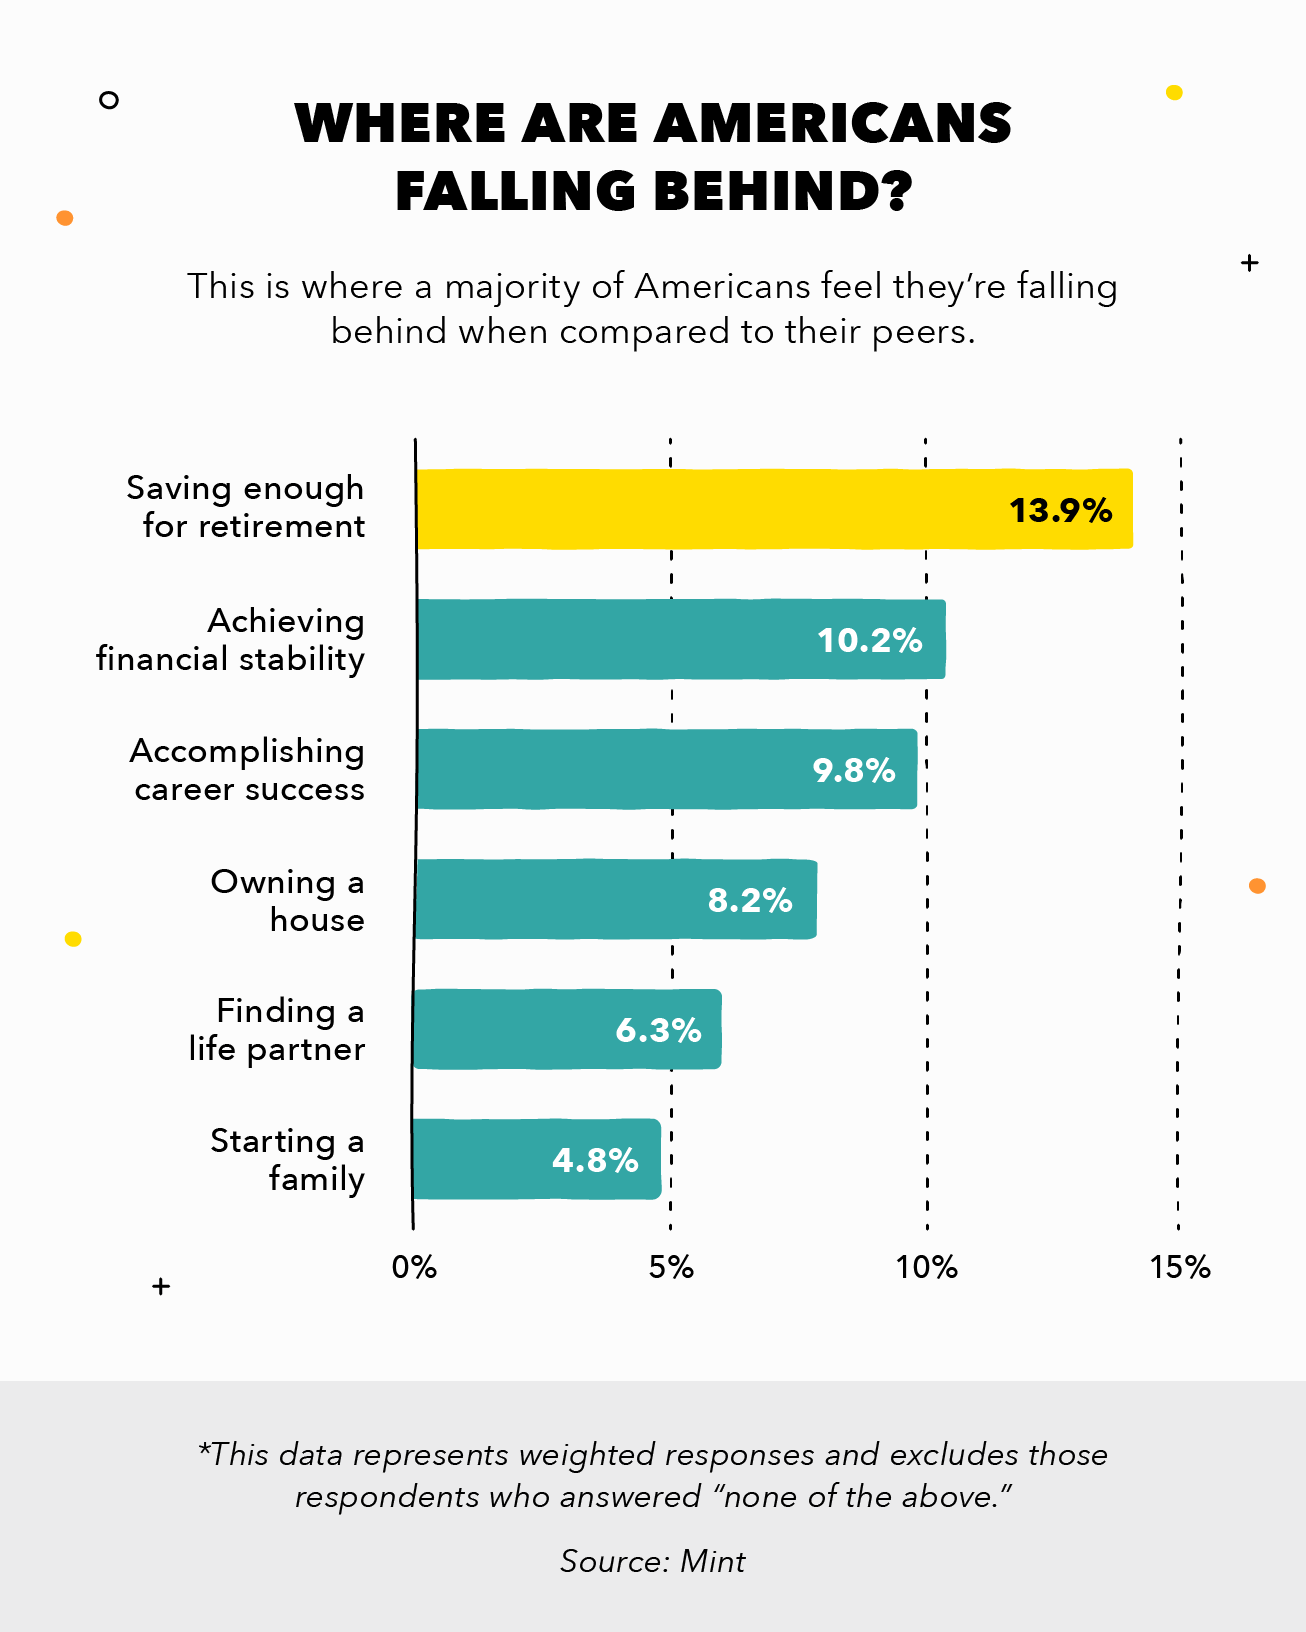 bar graph comparing fears of falling behind by age group